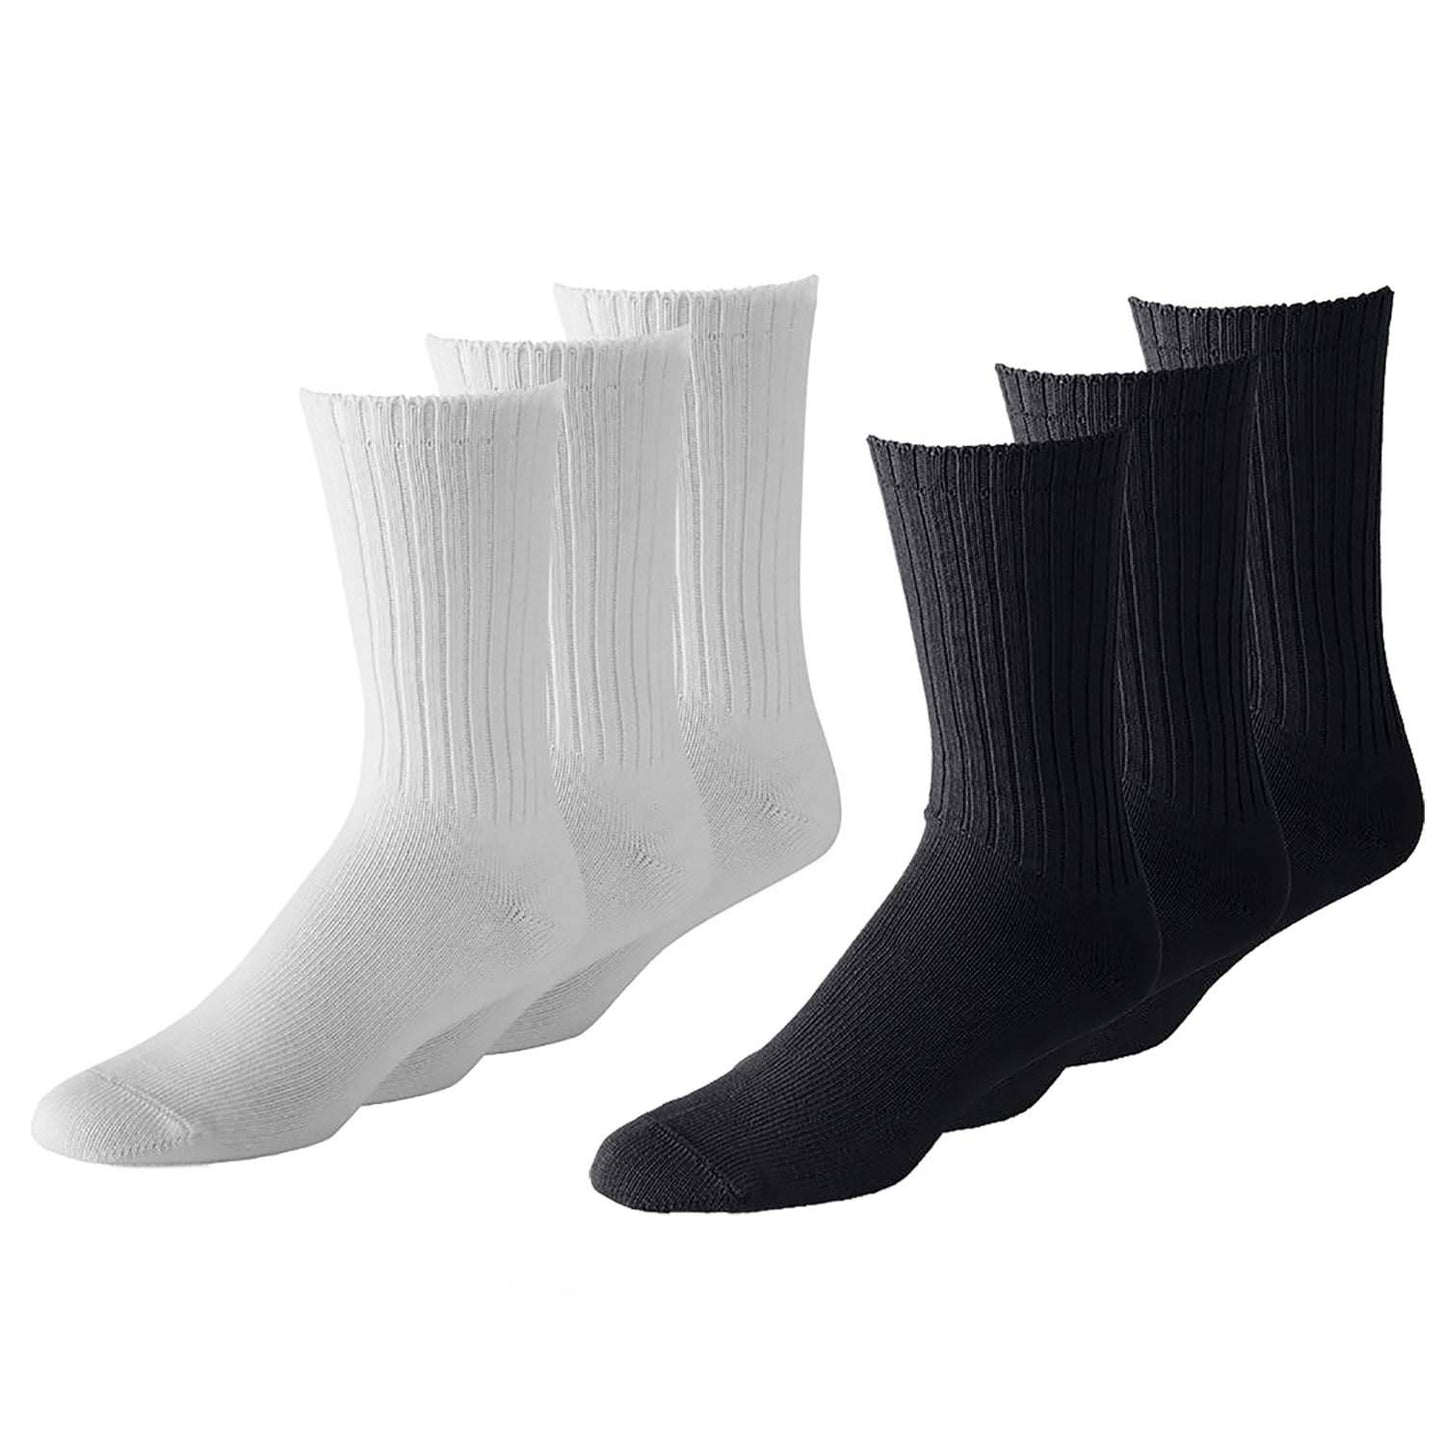 Mechaly Mens Crew and Low Cut Cotton Socks - 12 Pack